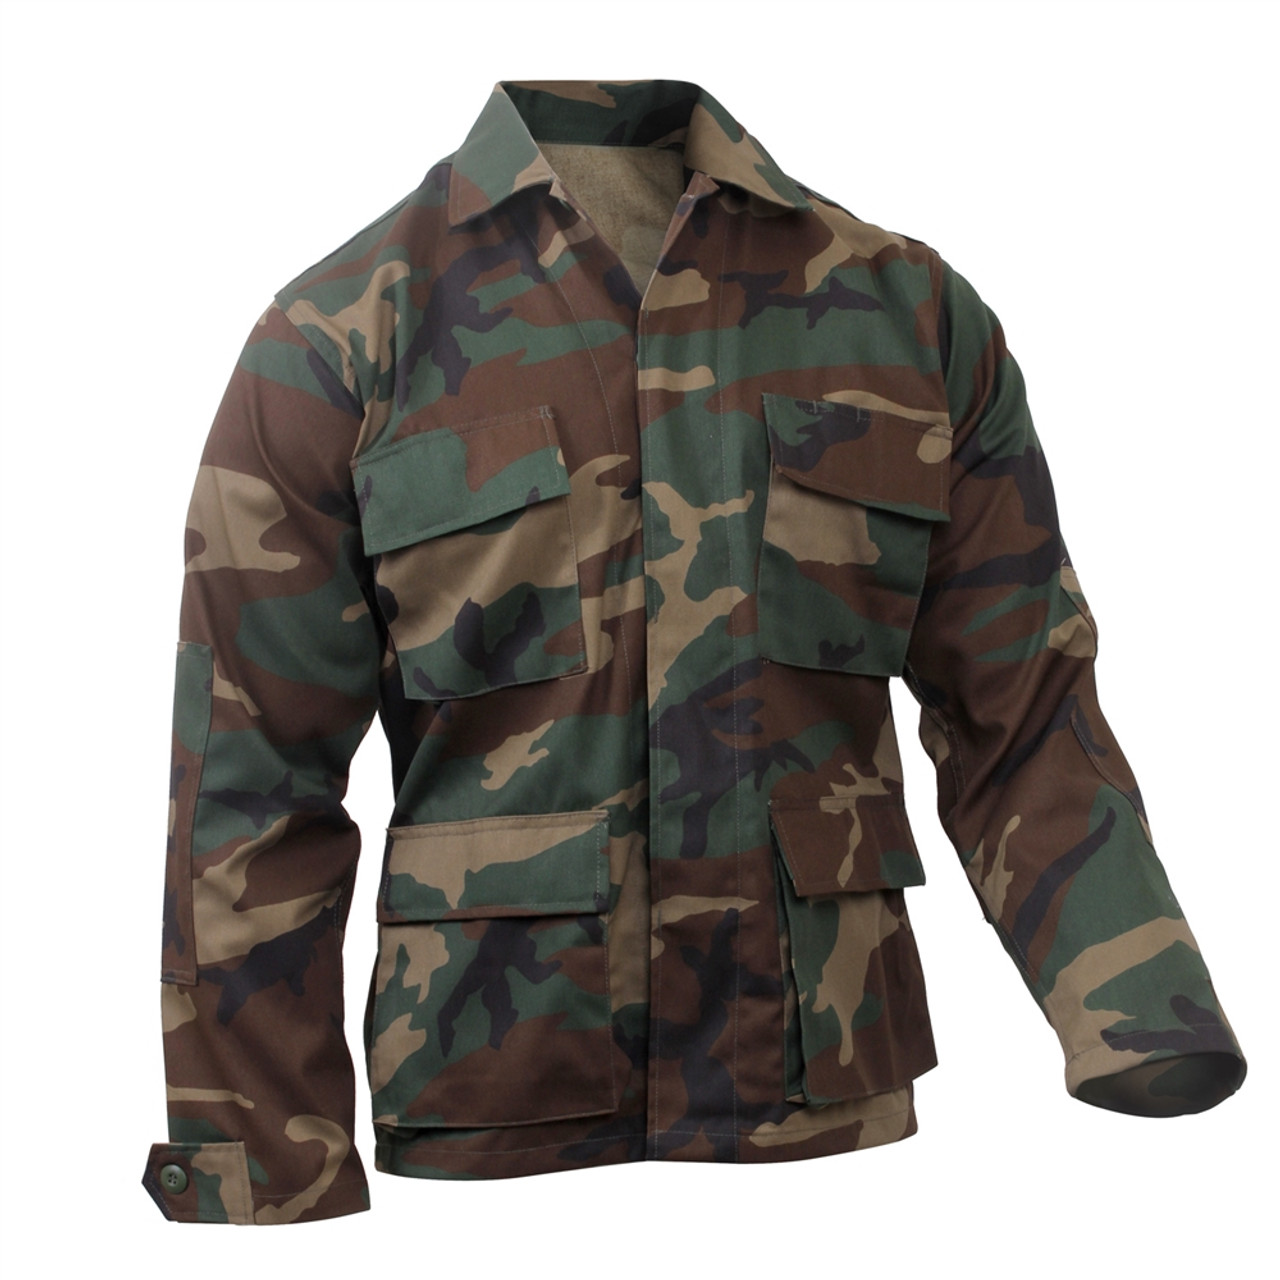 BDU Shirt- Woodland Camouflage from Hessen Tactical